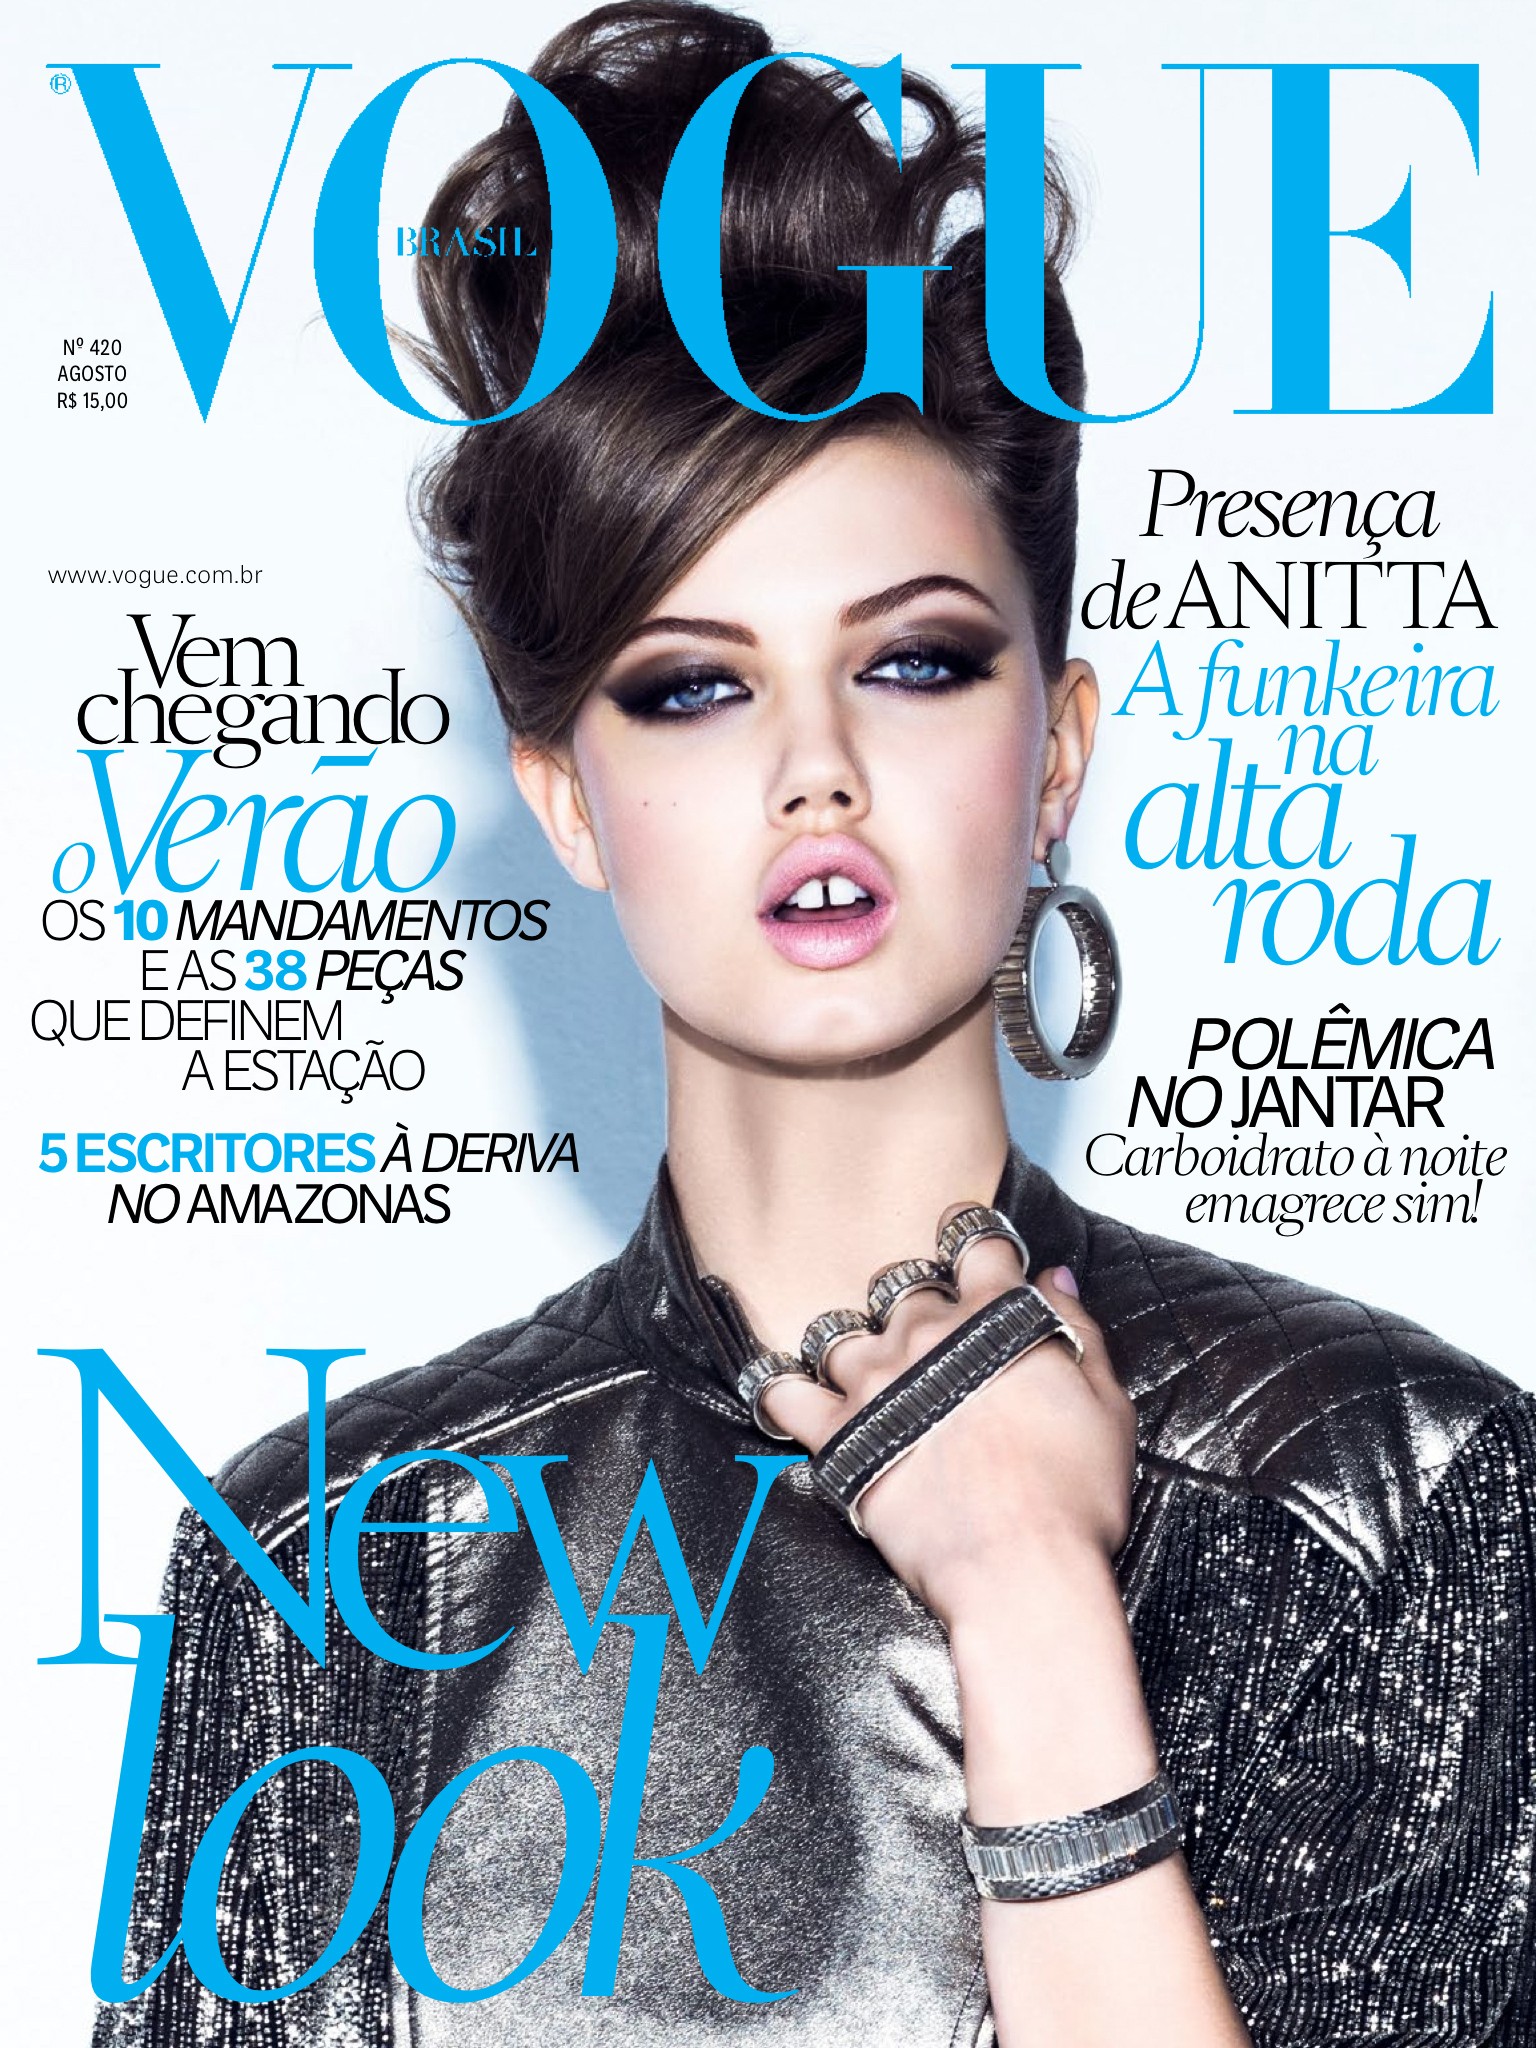 Beautiful Brunette Fashion Model Lindsey Wixson Modeling For The Cover Of Vogue Brasil (Vogue Brazil) Magazine And Vogue Brasil Fashion Editorials Modeling As One Of The Highest Paid Models In The World.